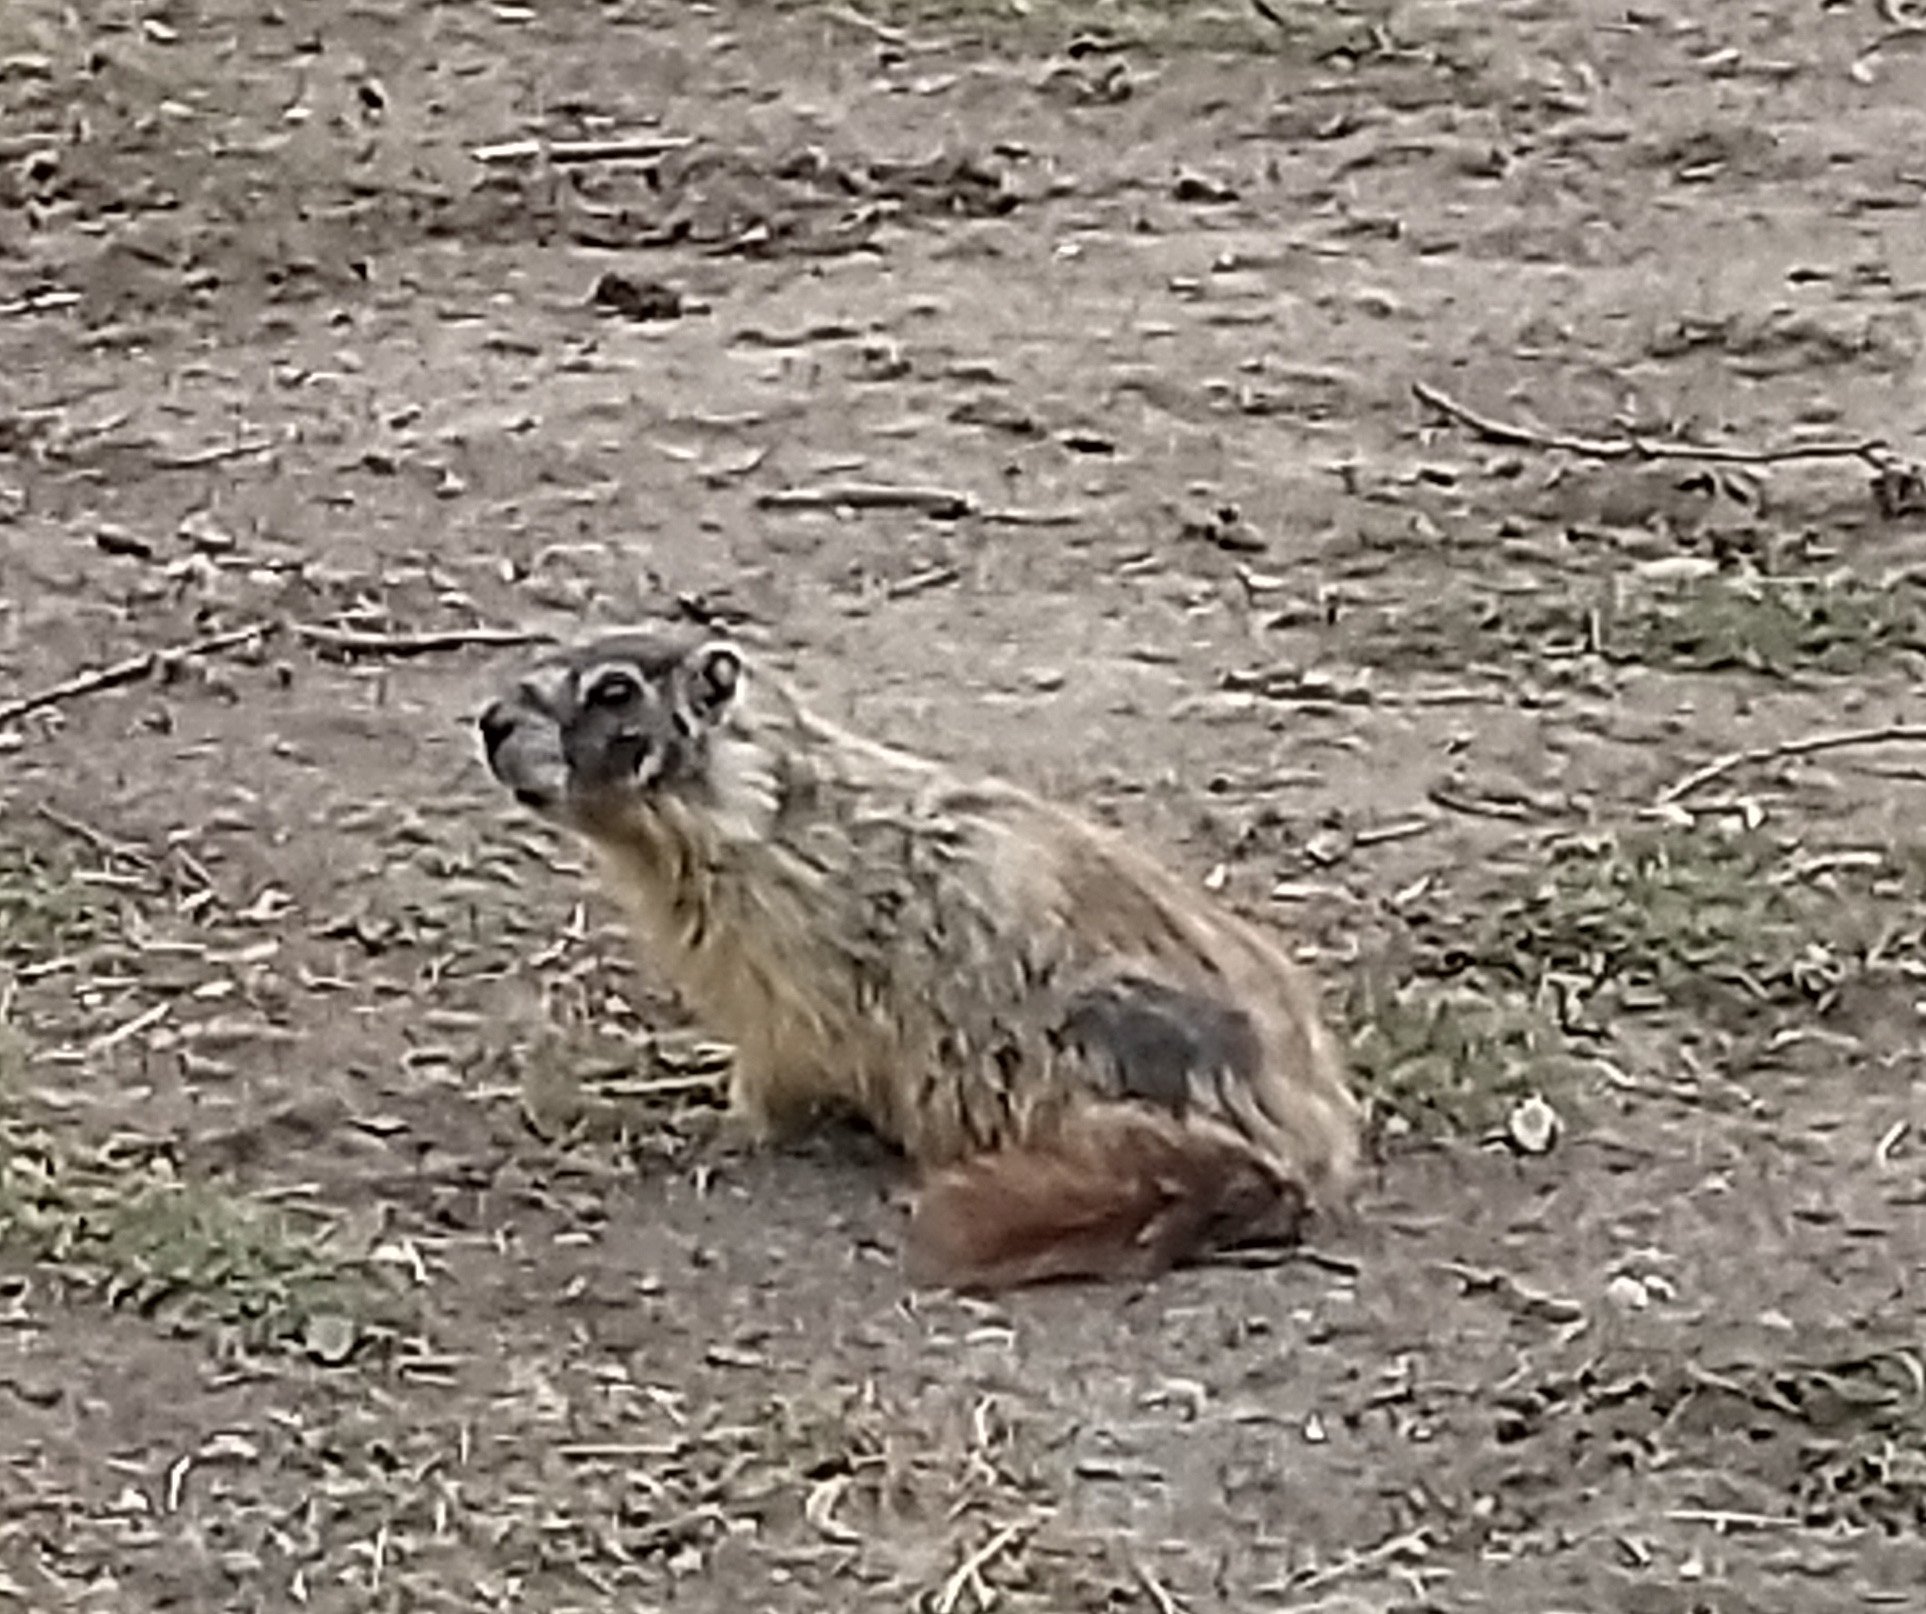 I think this is called a Rocky Mountain Marmot. Their flesh is tender and juicy.